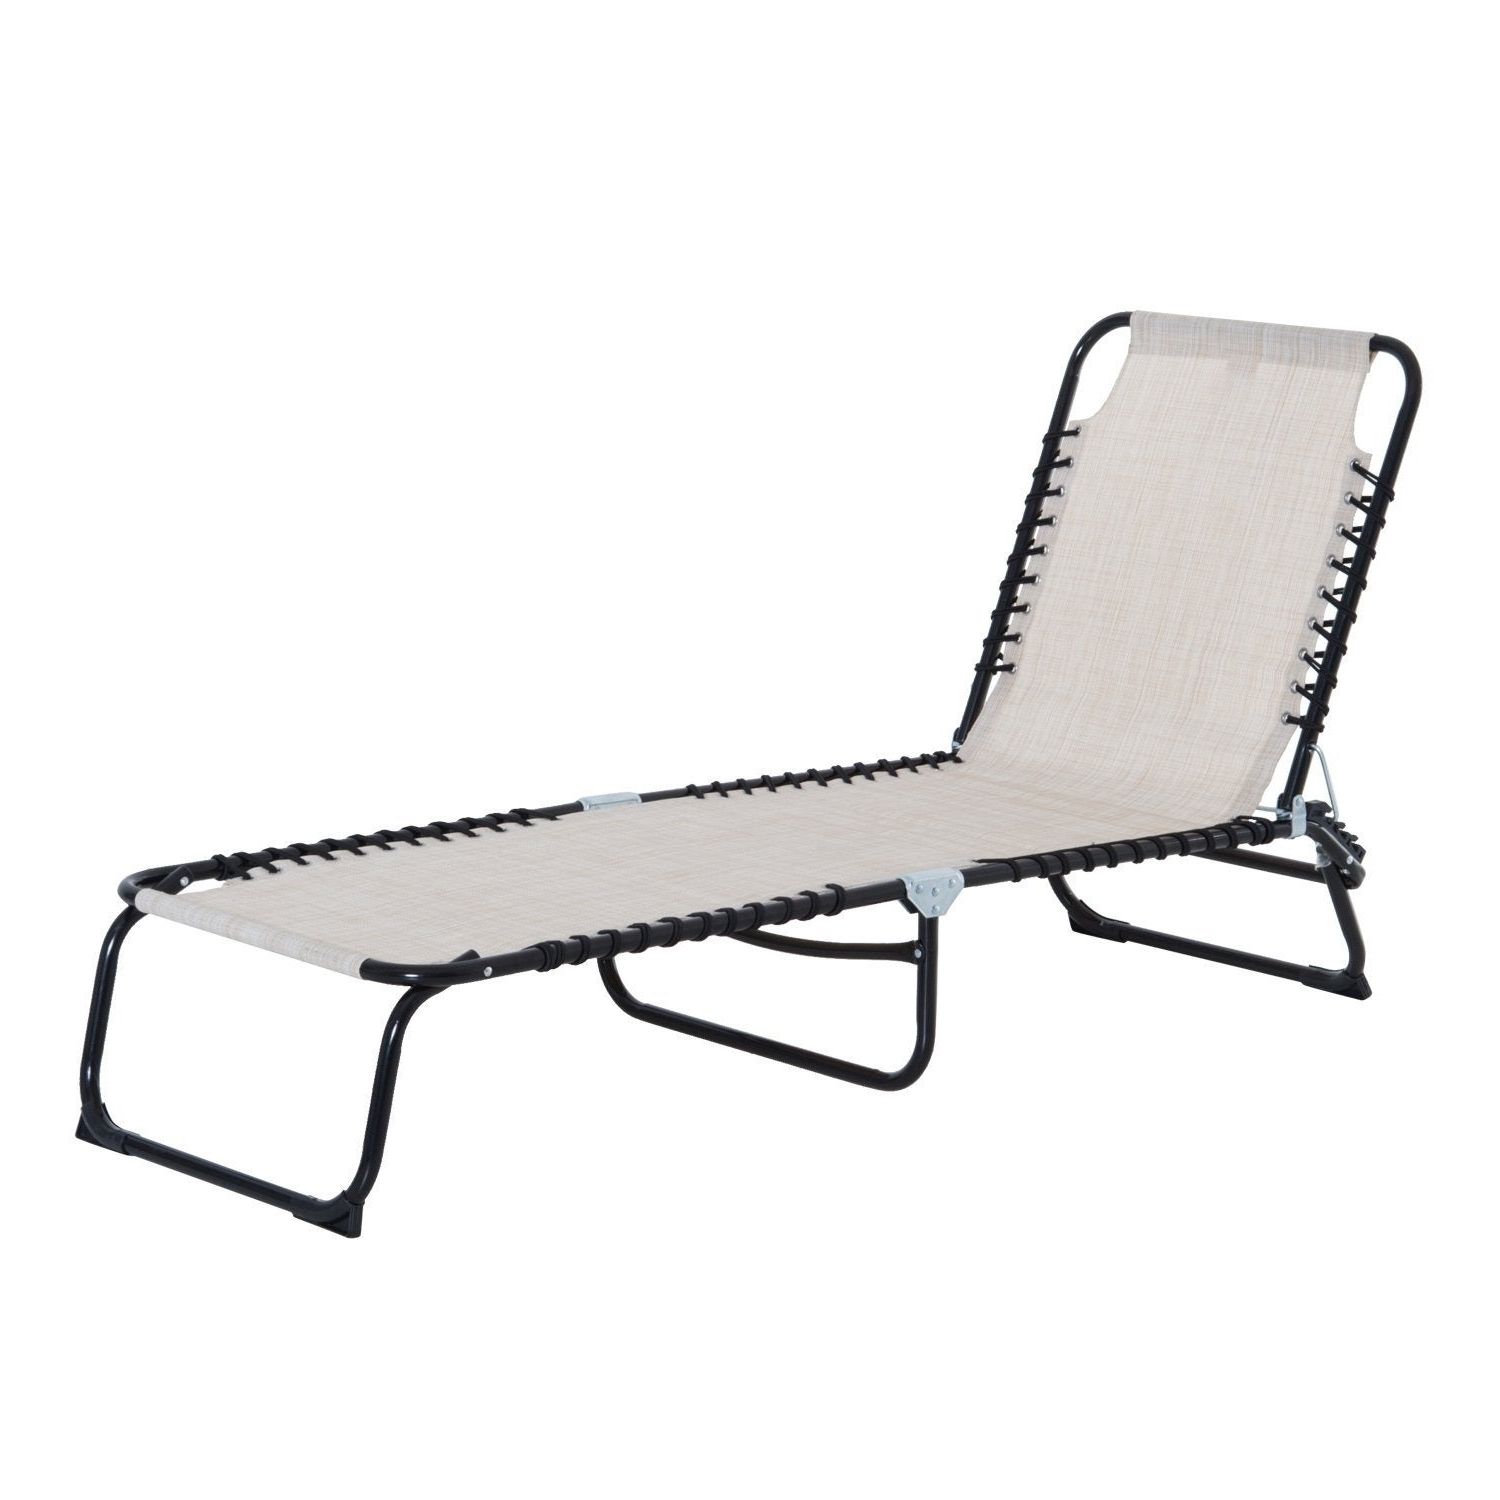 Latest Outsunny 3 Position Portable Reclining Beach Chaise Lounge Folding Chair  Outdoor Patio – Cream White Pertaining To Reclining Sling Lounge Chairs (View 4 of 25)